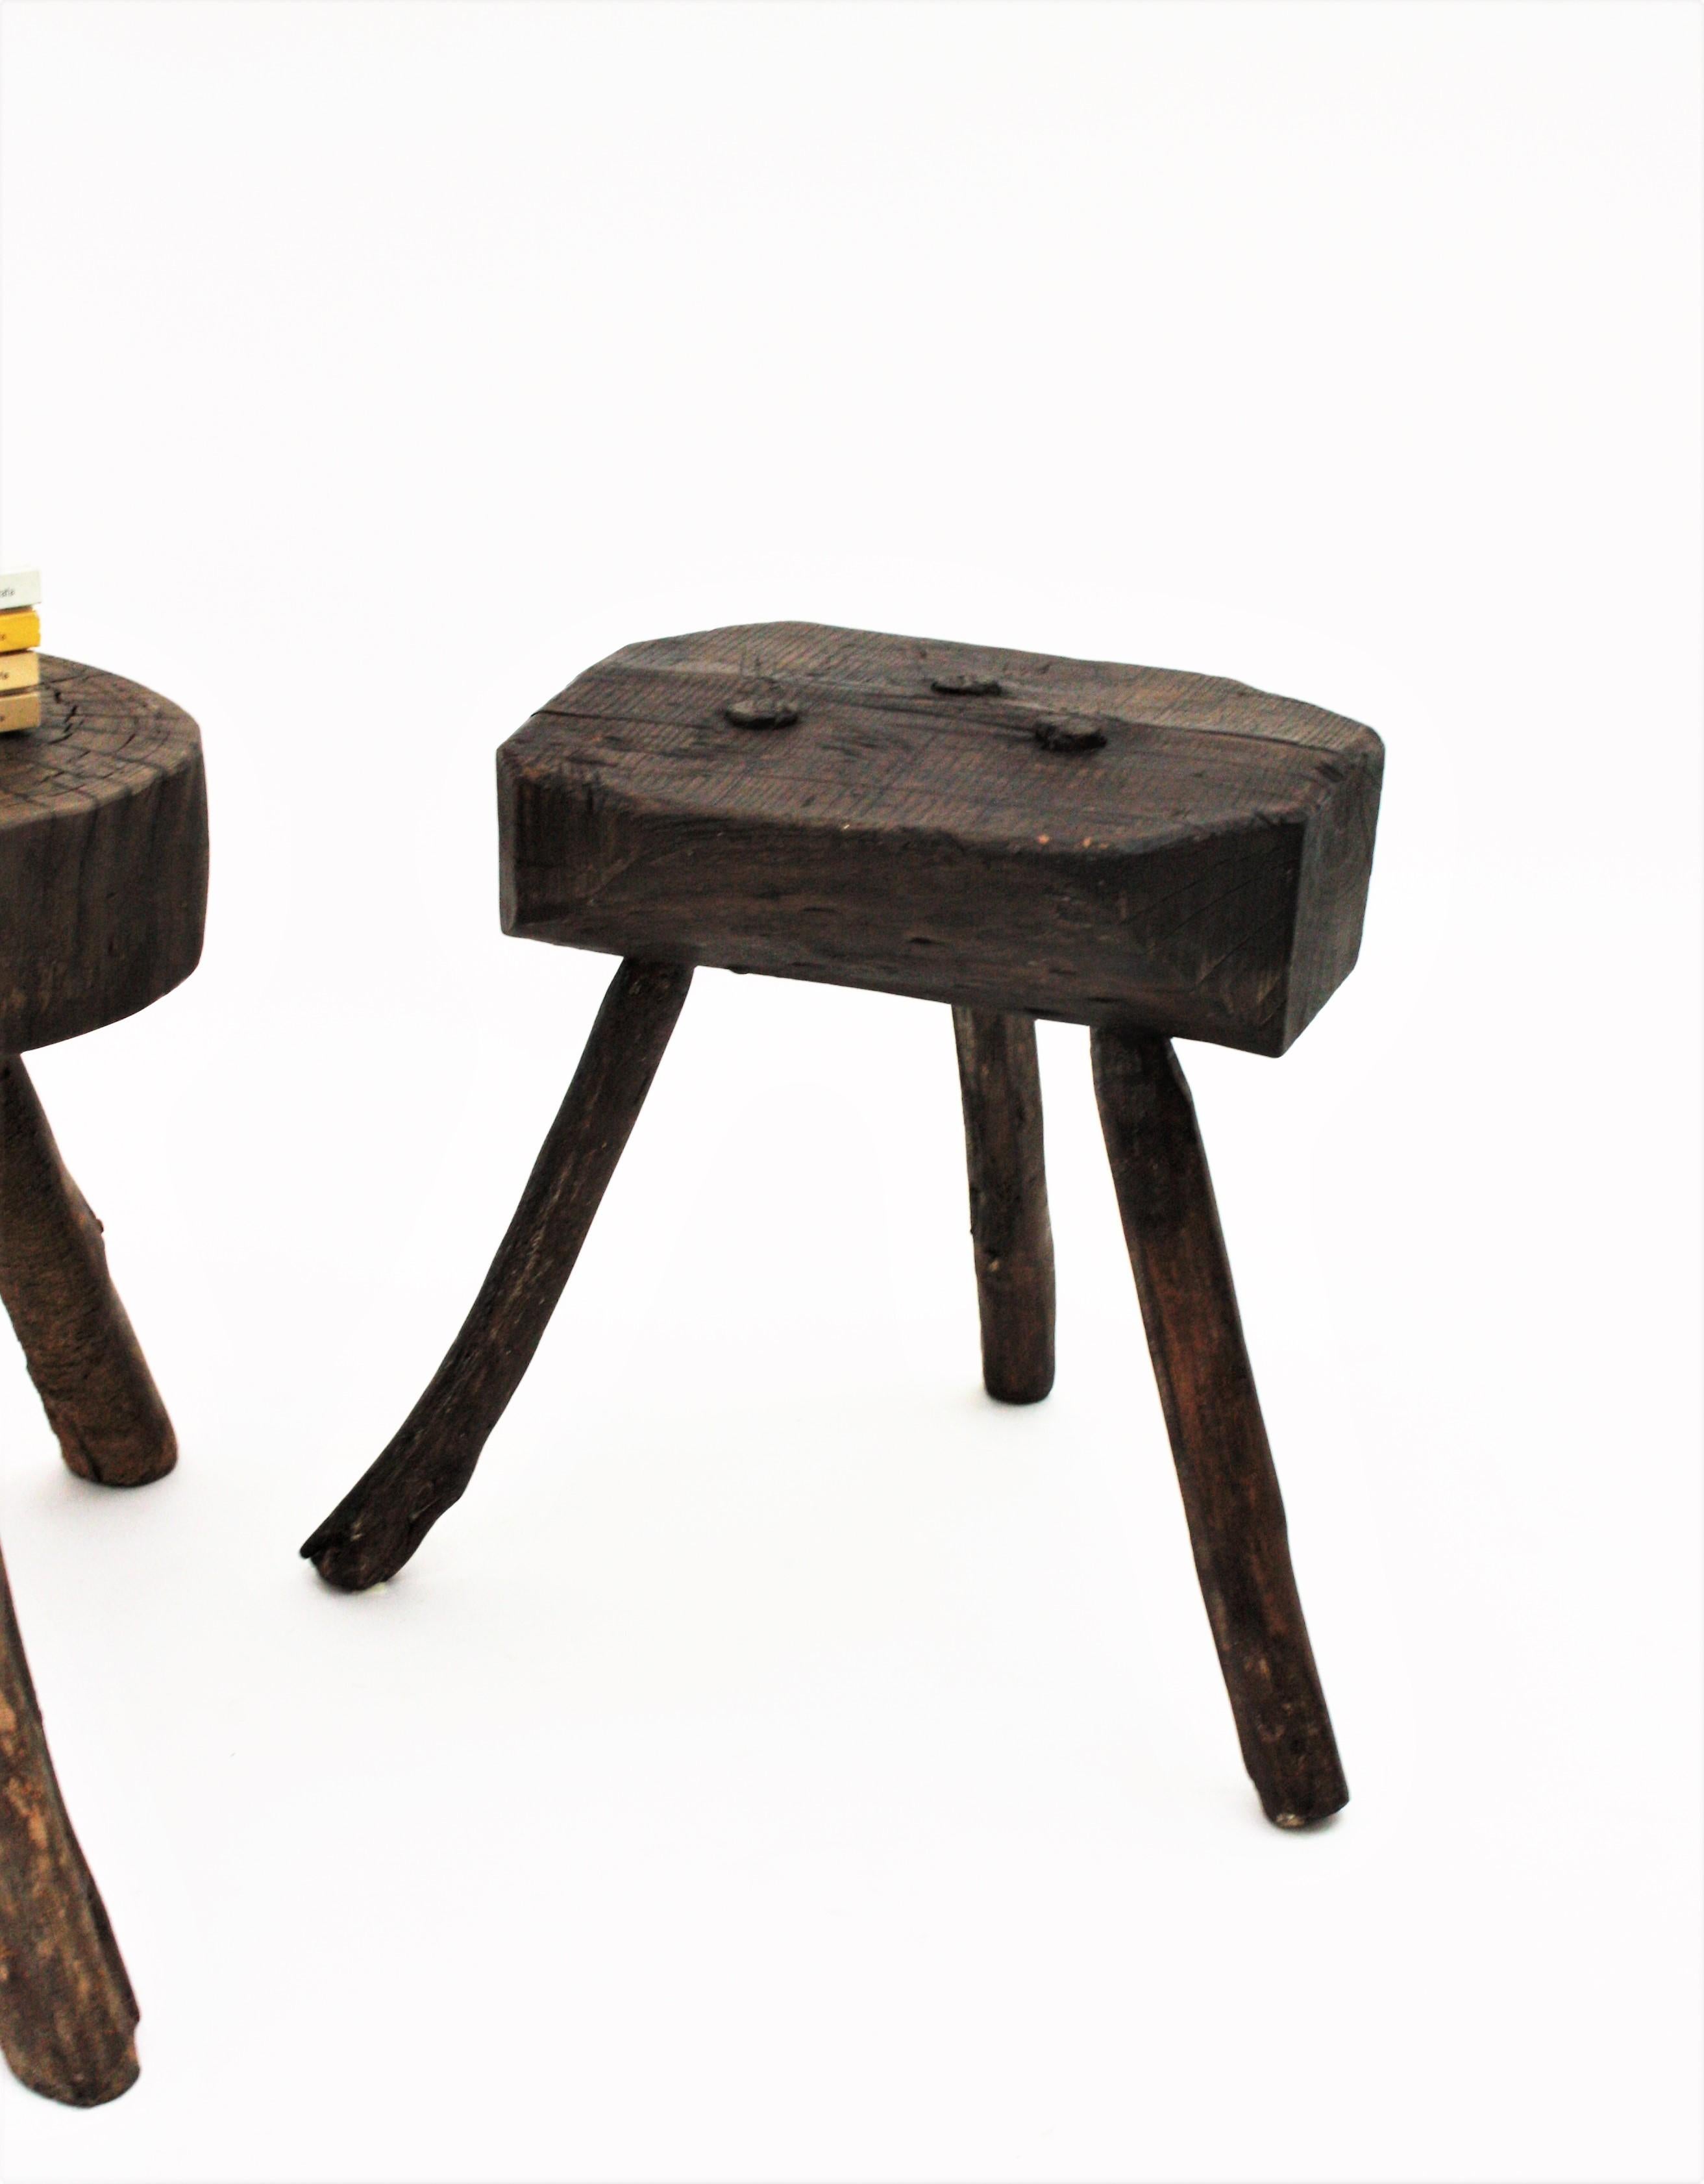 20th Century Pair of Spanish Rustic Wood Tripod Side Table / Stools For Sale